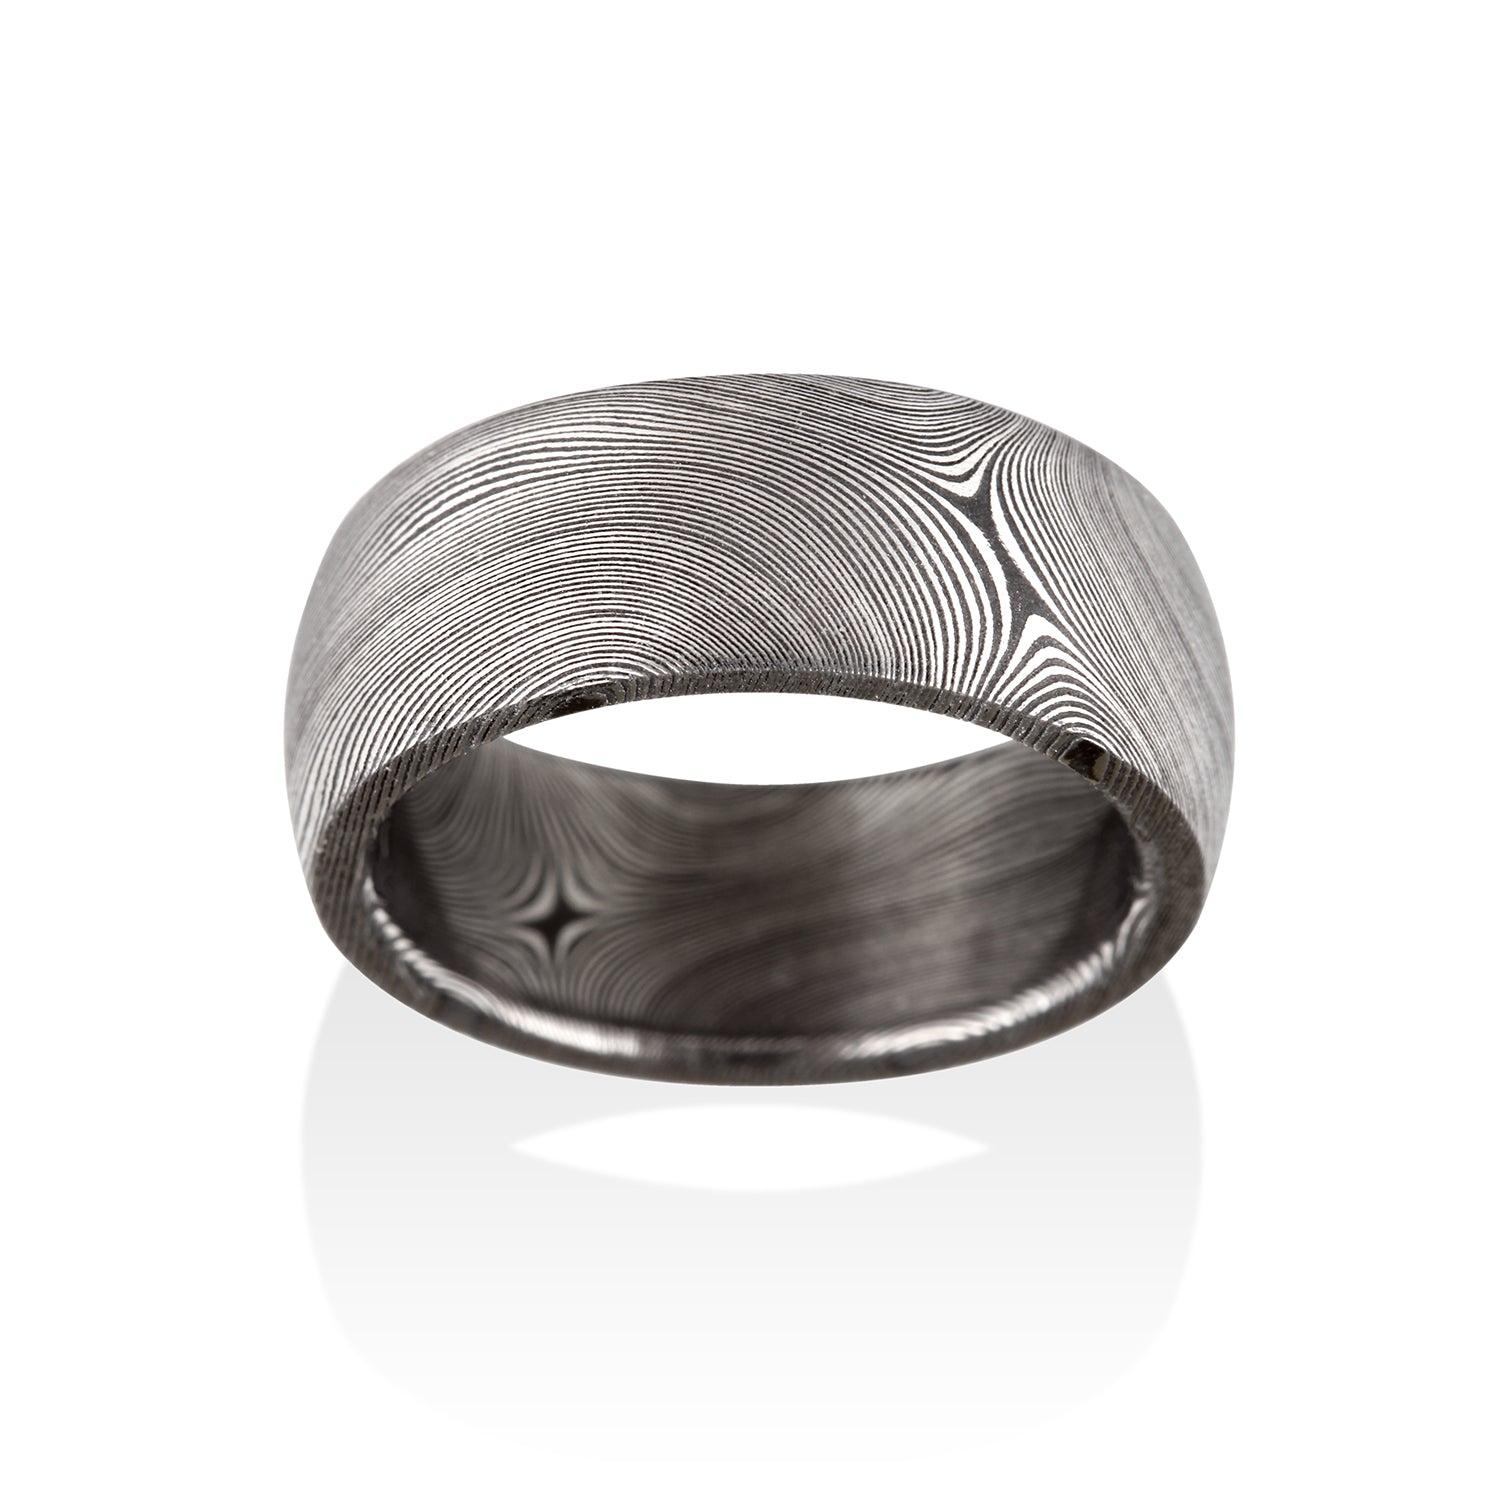 Starlight Oxidized Damascus Steel Ring by Chris Ploof - Talisman Collection Fine Jewelers